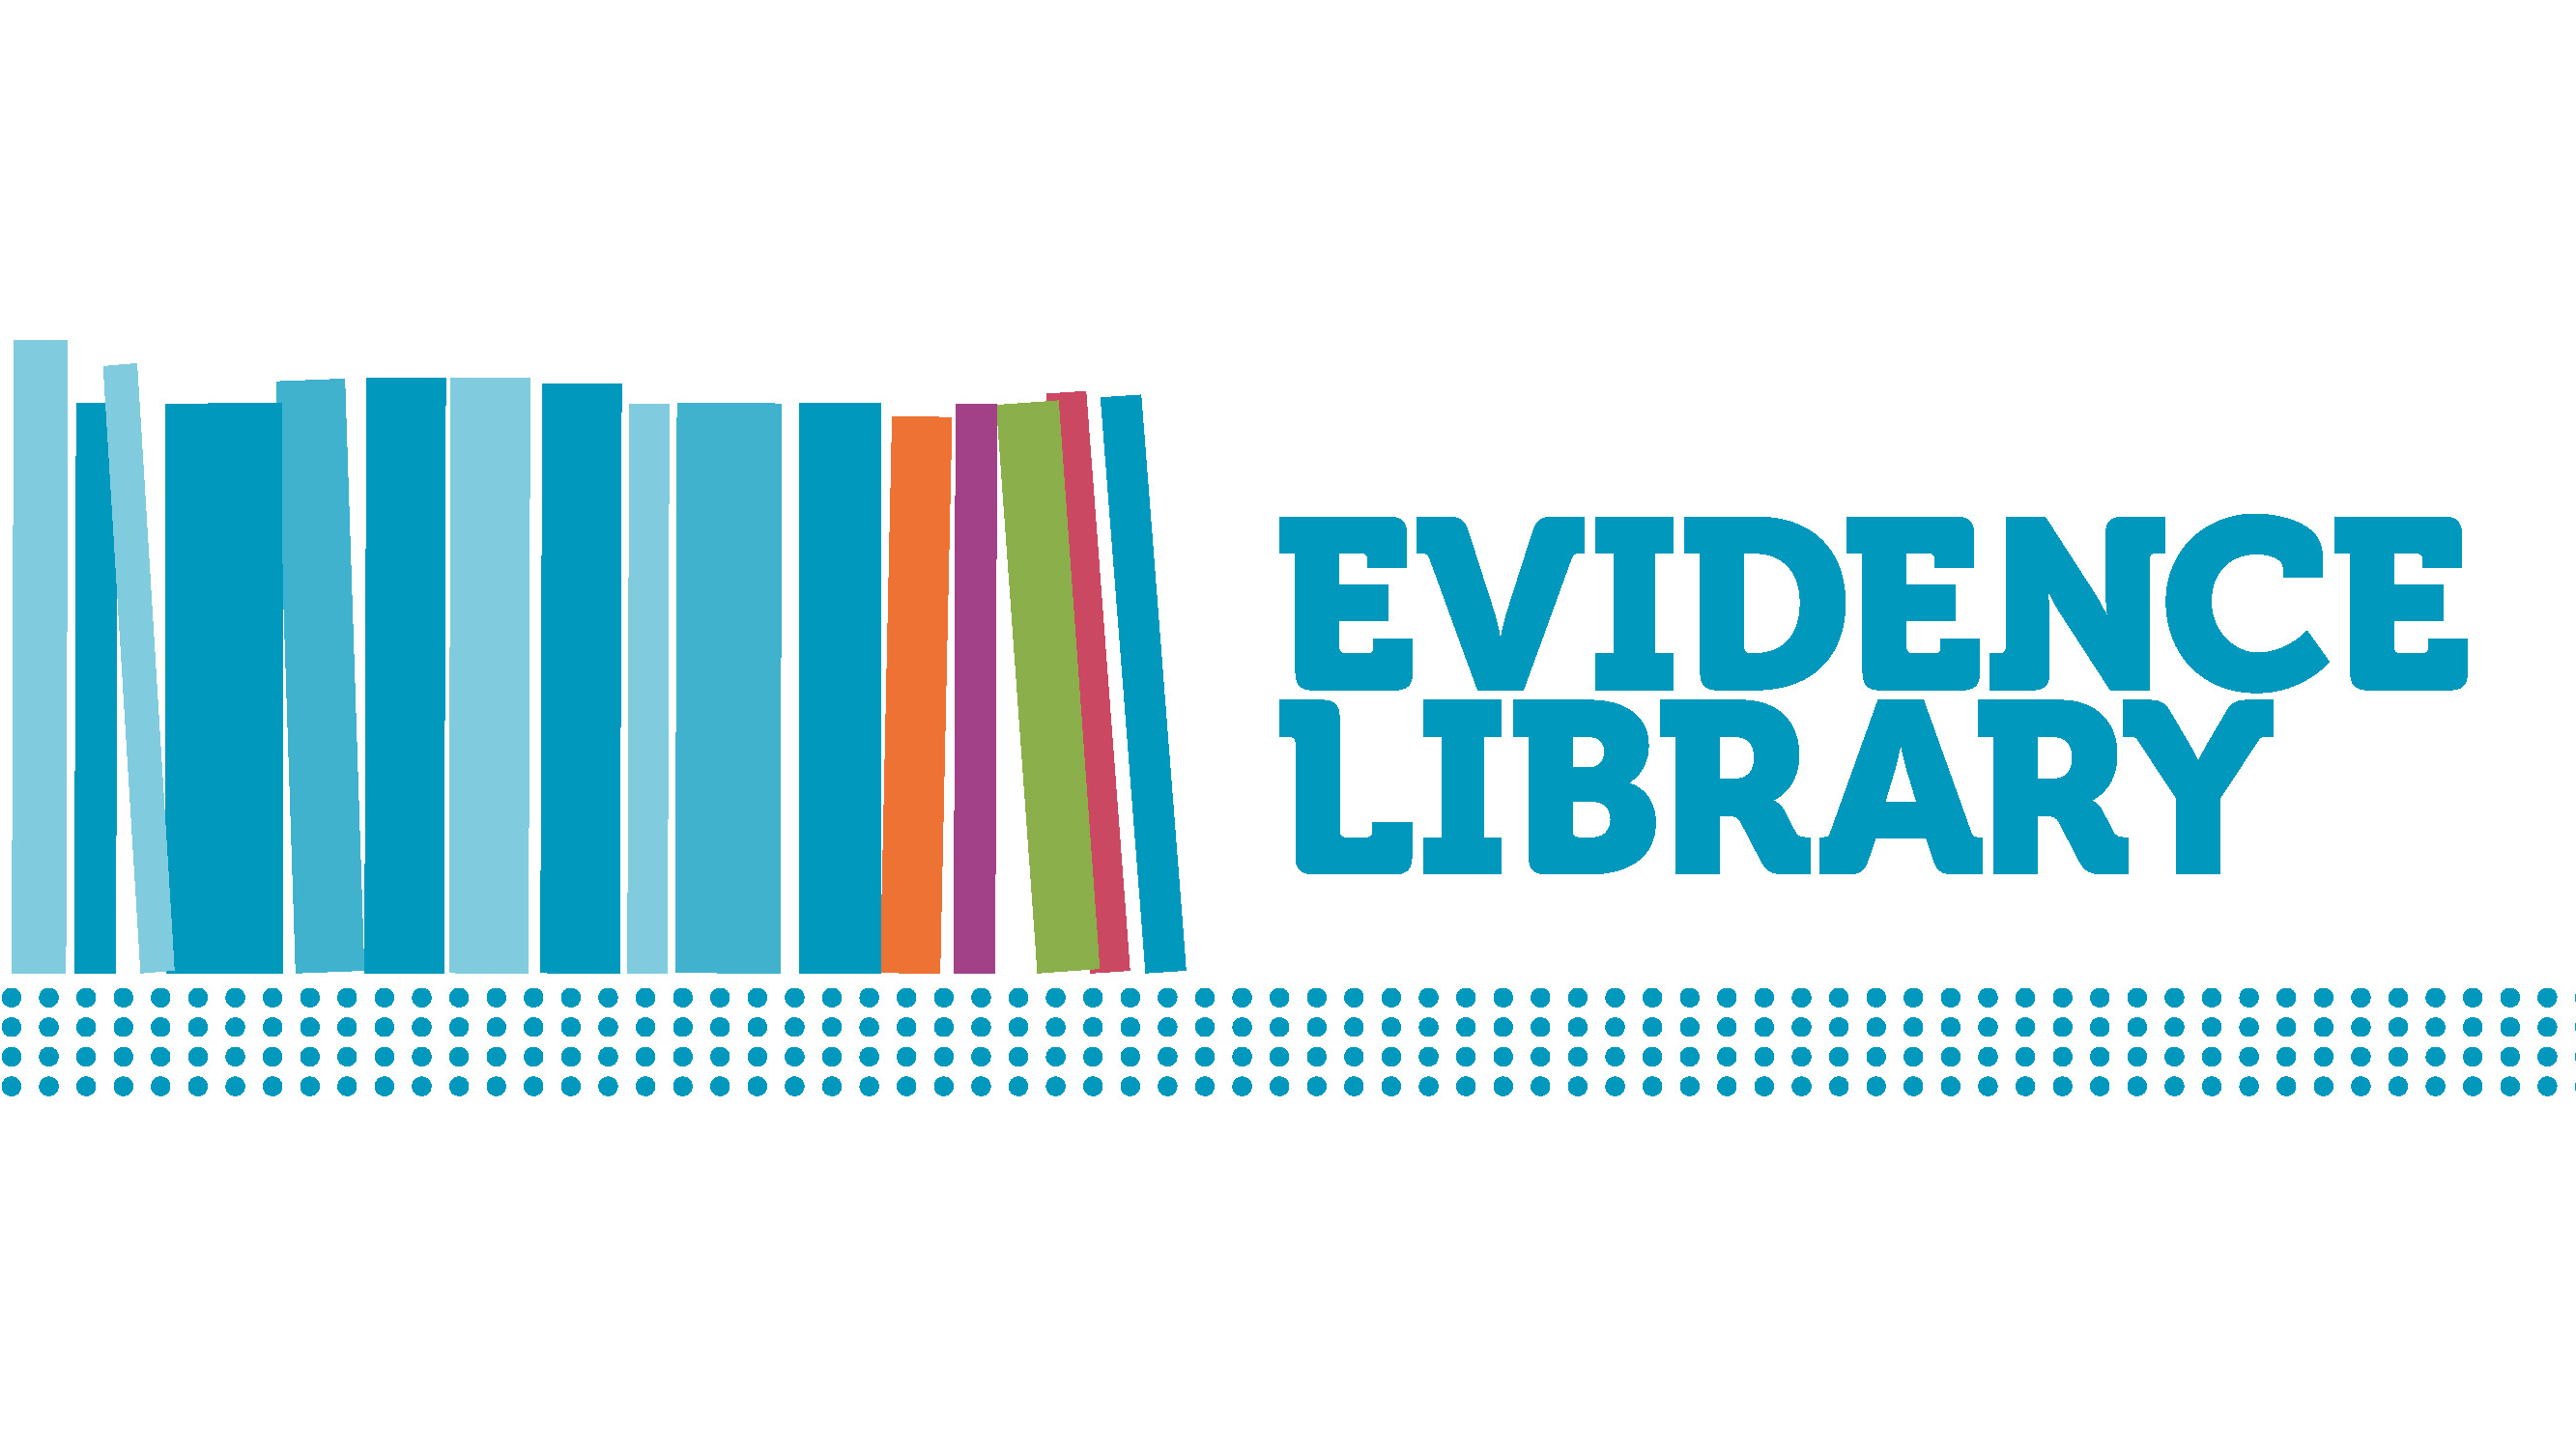 Evidence Library banner image